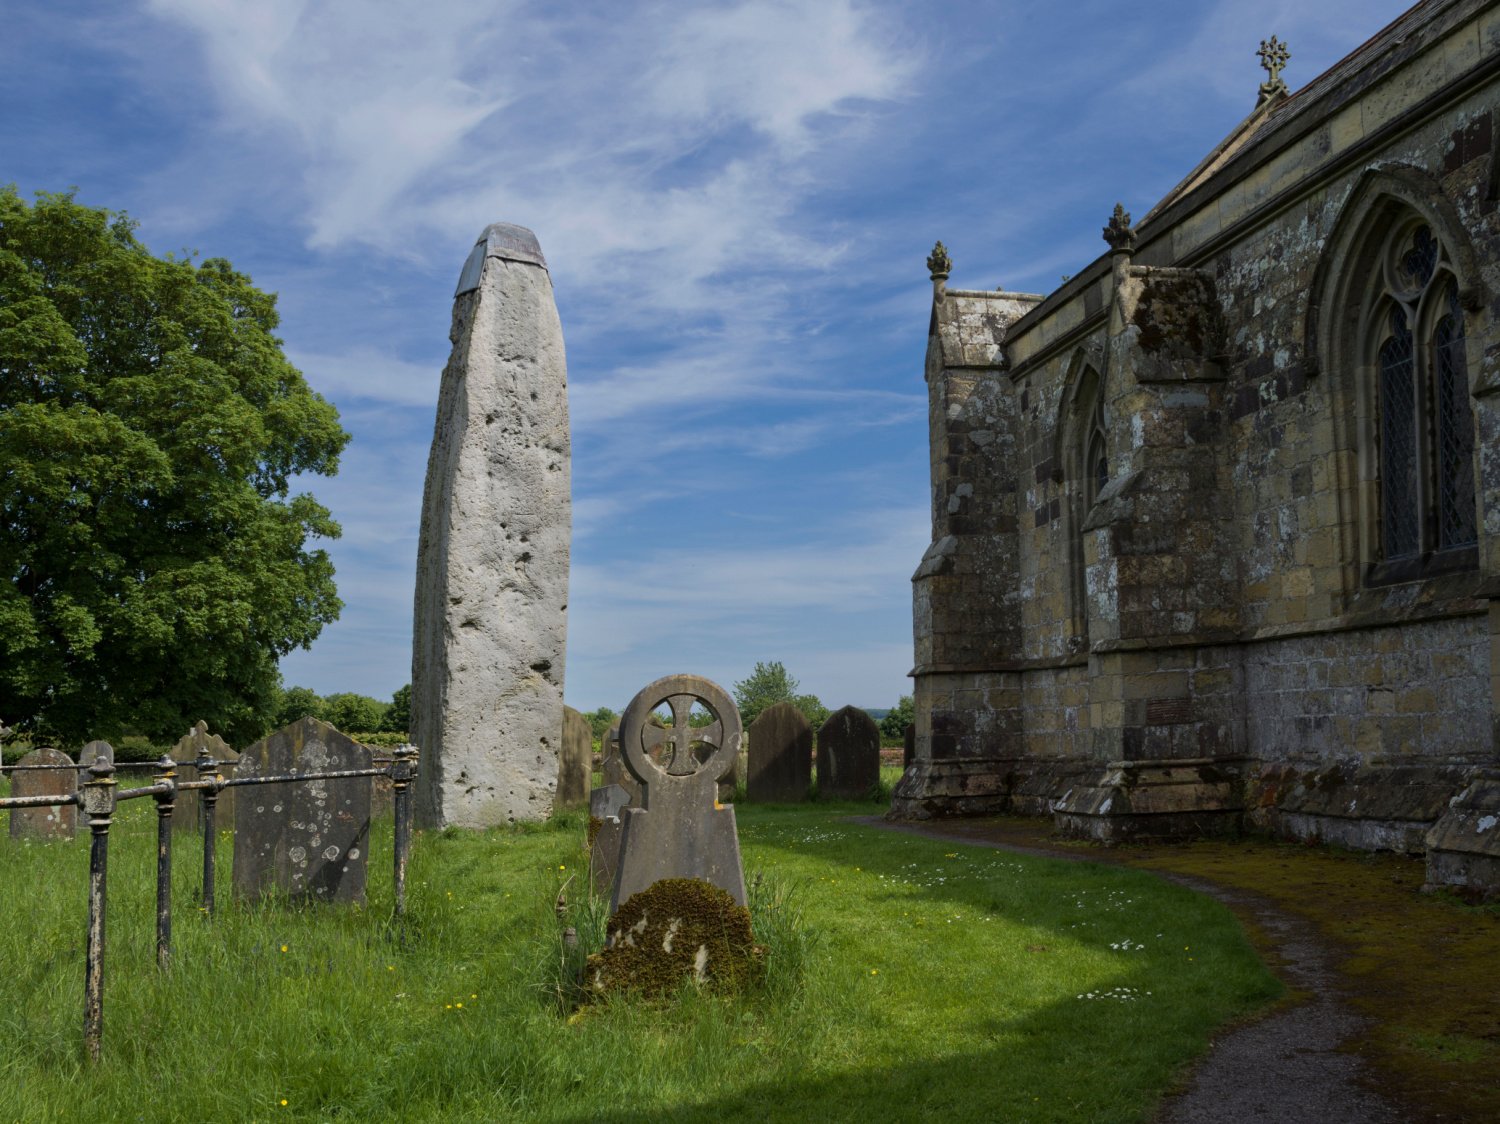 Image name rudston monolith east yorkshire the 3 image from the post A look at the history of the Rudston Monolith, with Dr Emma Wells in Yorkshire.com.